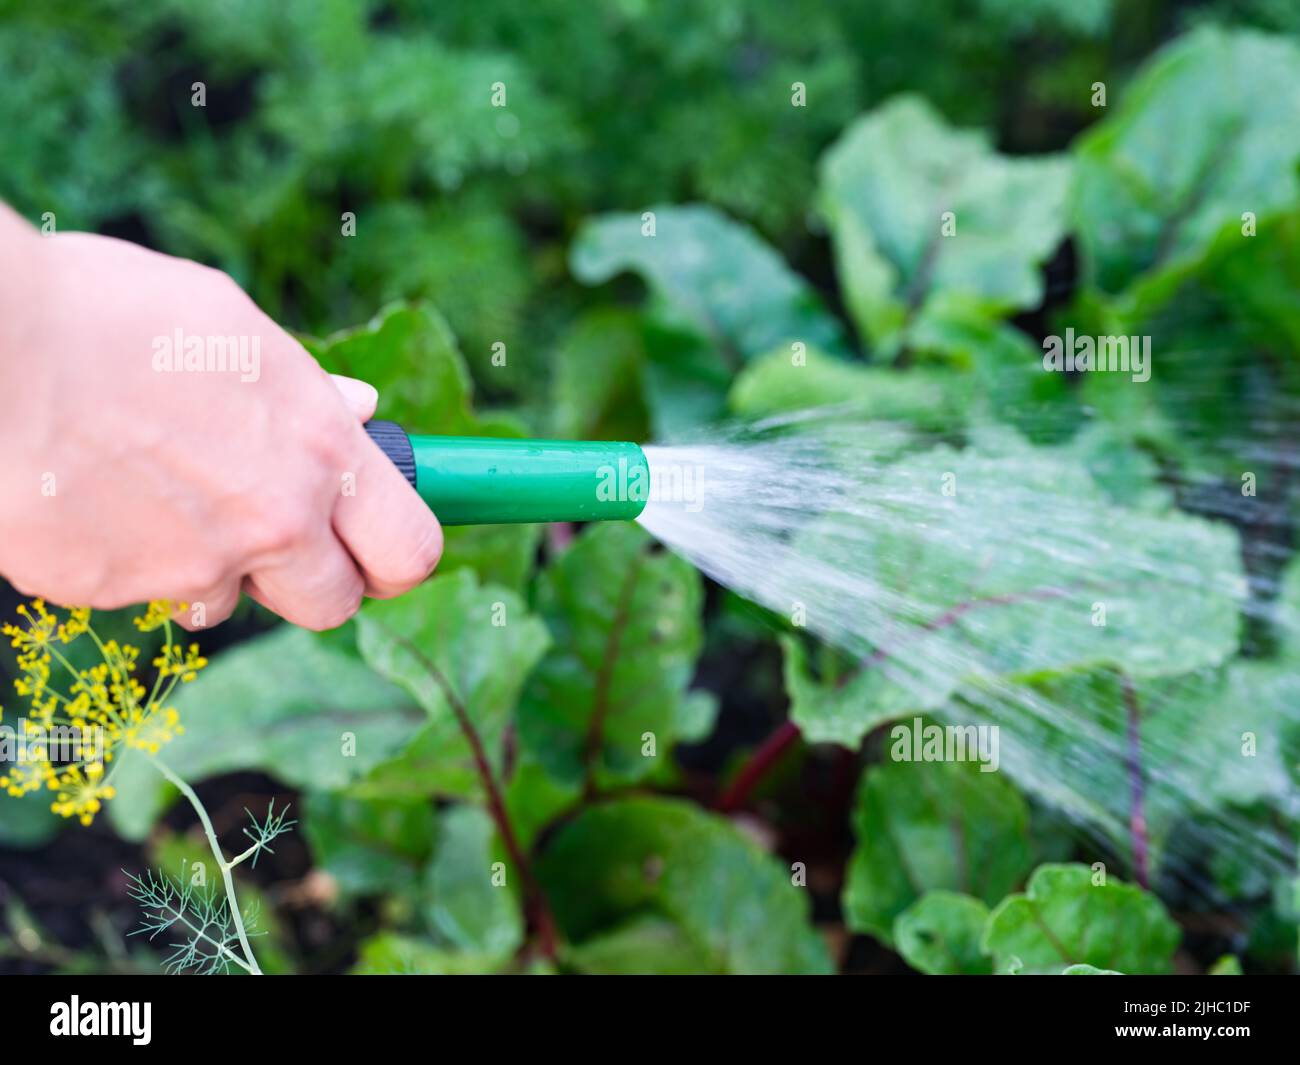 A close-up shot of a woman watering vegetable beds with a hose Stock Photo